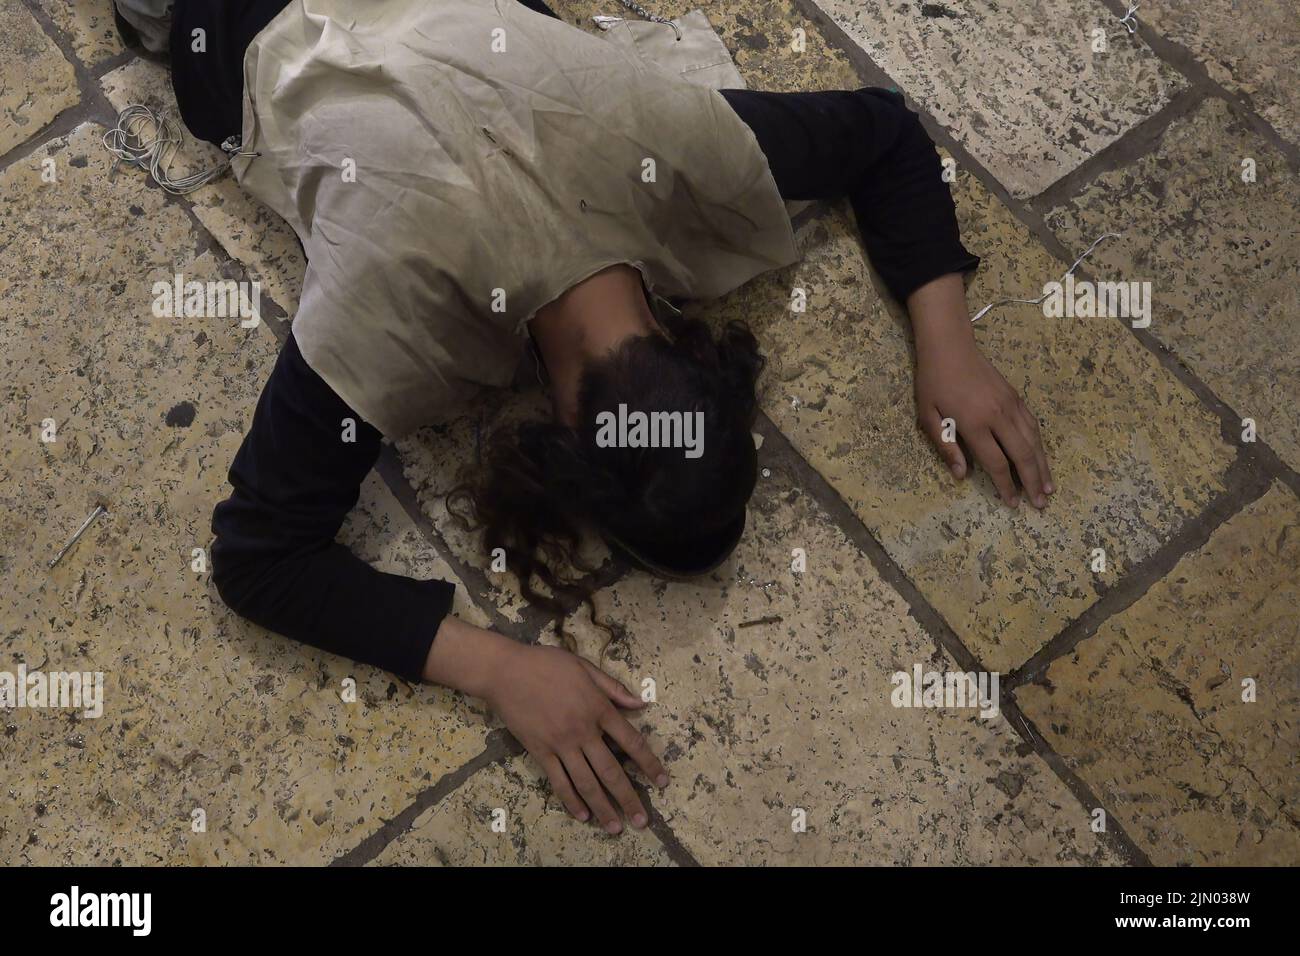 A religious Jew prostrates on the ground in prayer as Jews mourn at Bab al-Qattanin Gate, which leads to the Temple Mount in the Muslim Quarter, on the Jewish feast of Tisha B'Av on August 7, 2022 in Jerusalem, Israel. Jewish people around the world read from the Book of Lamentations, marking the beginning of Tisha B'Av, the annual fasting day commemorating the destruction of the First and Second Temples in Jerusalem Stock Photo